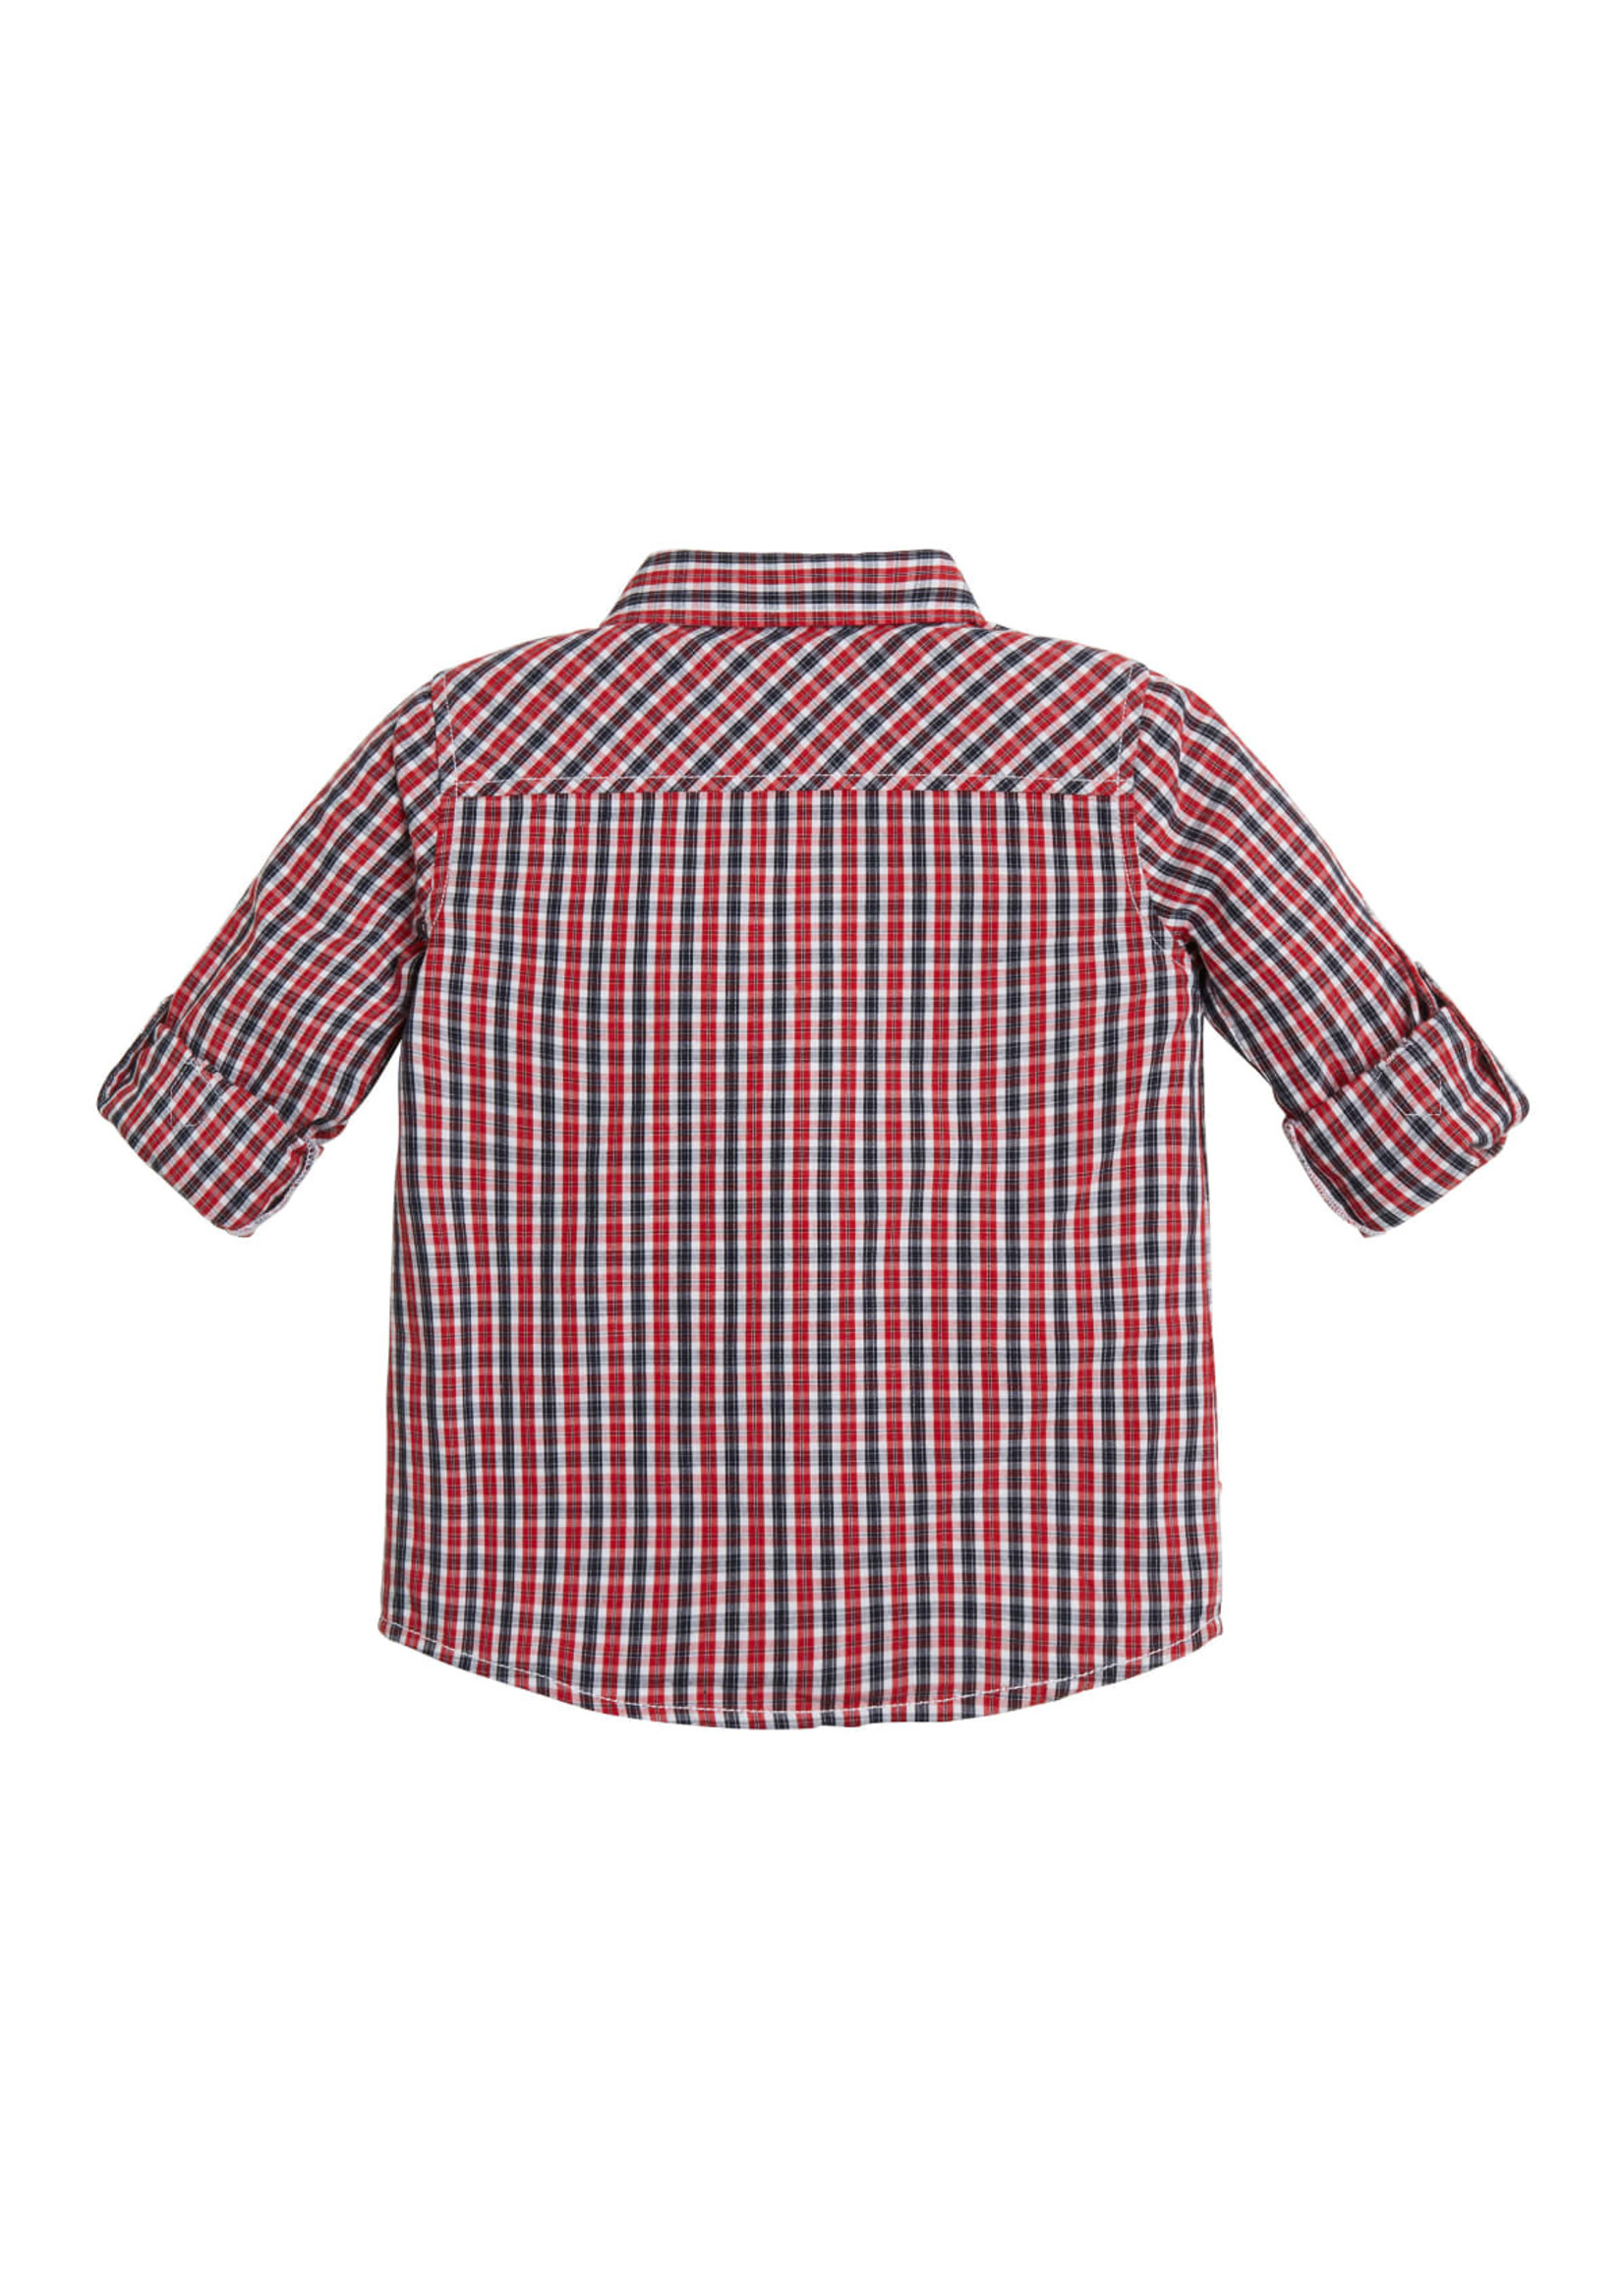 GUESS GUESS Hemdje blue/red check